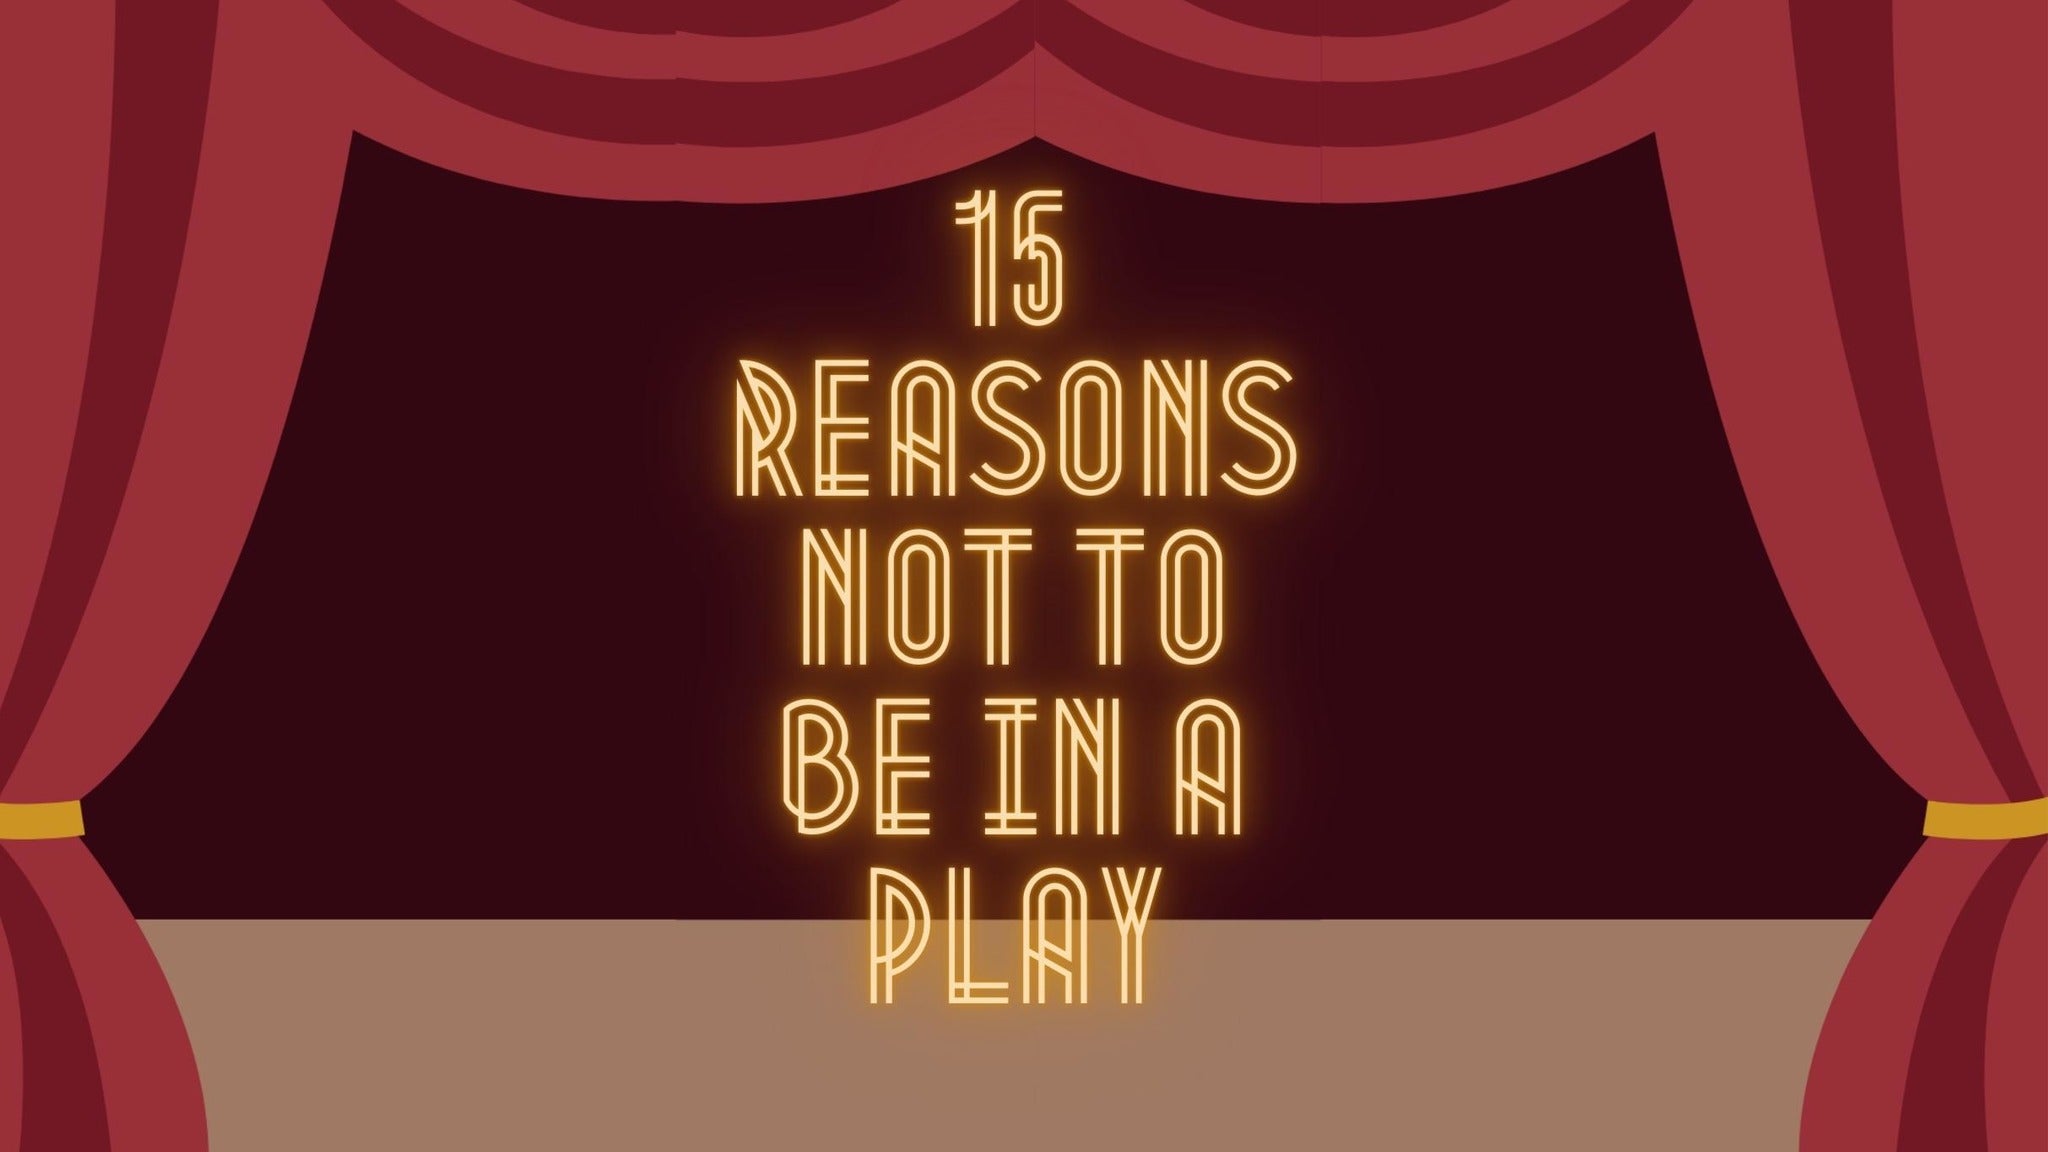 15 Reasons Not to be in a Play in Phoenix promo photo for Onsale presale offer code